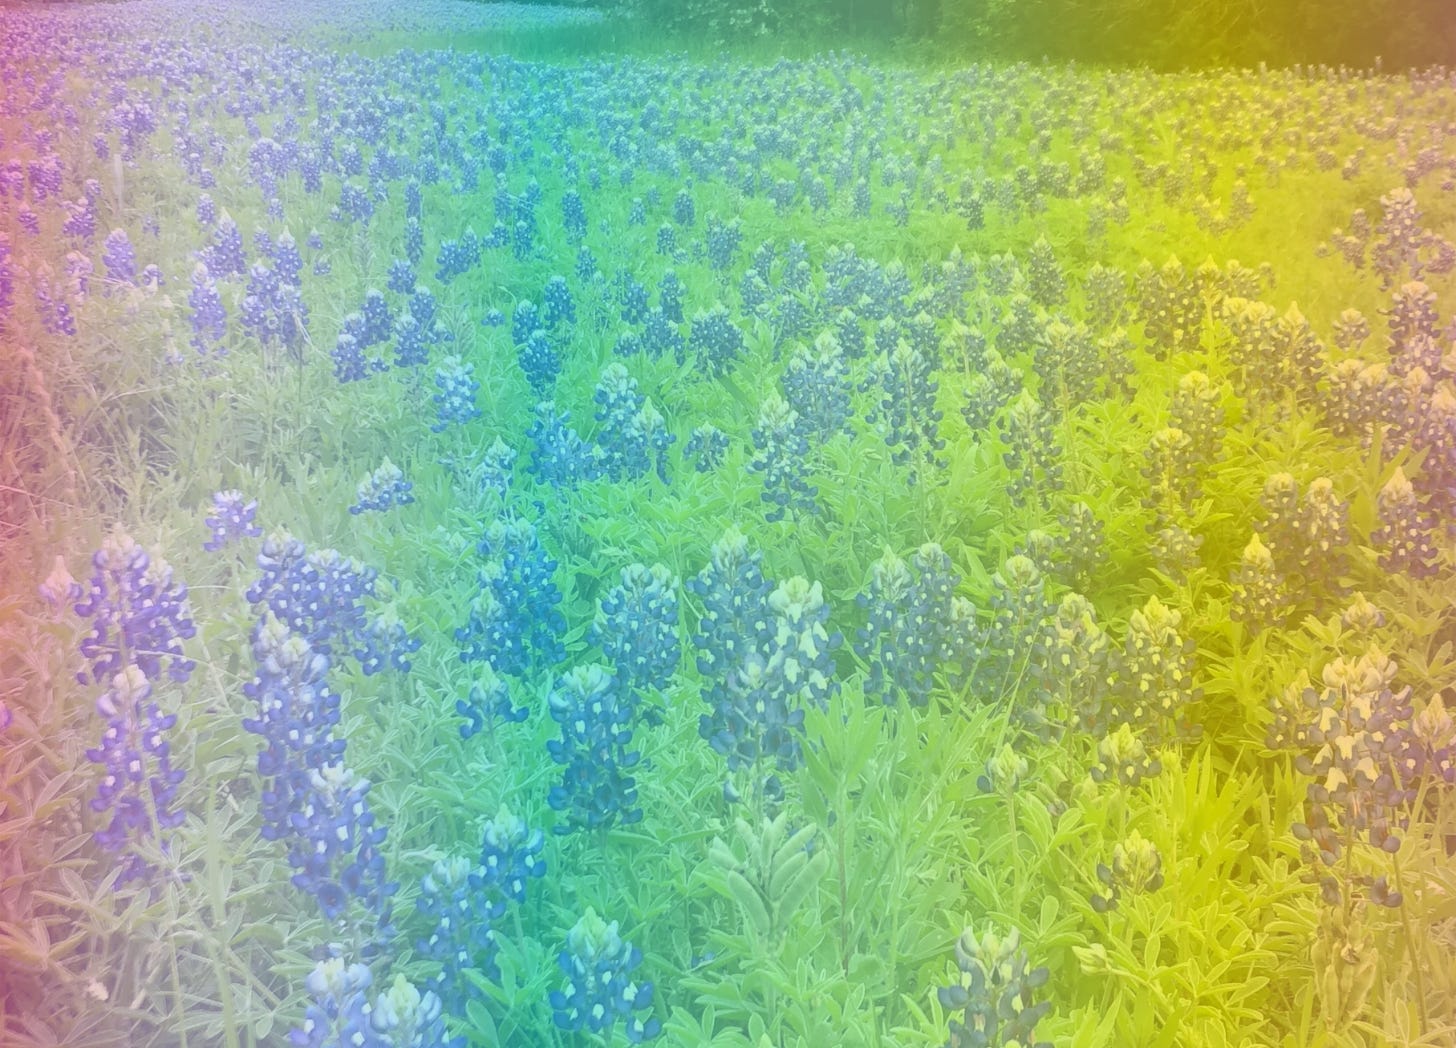 A photo of a field of Texas bluebonnets with a rainbow filter over it